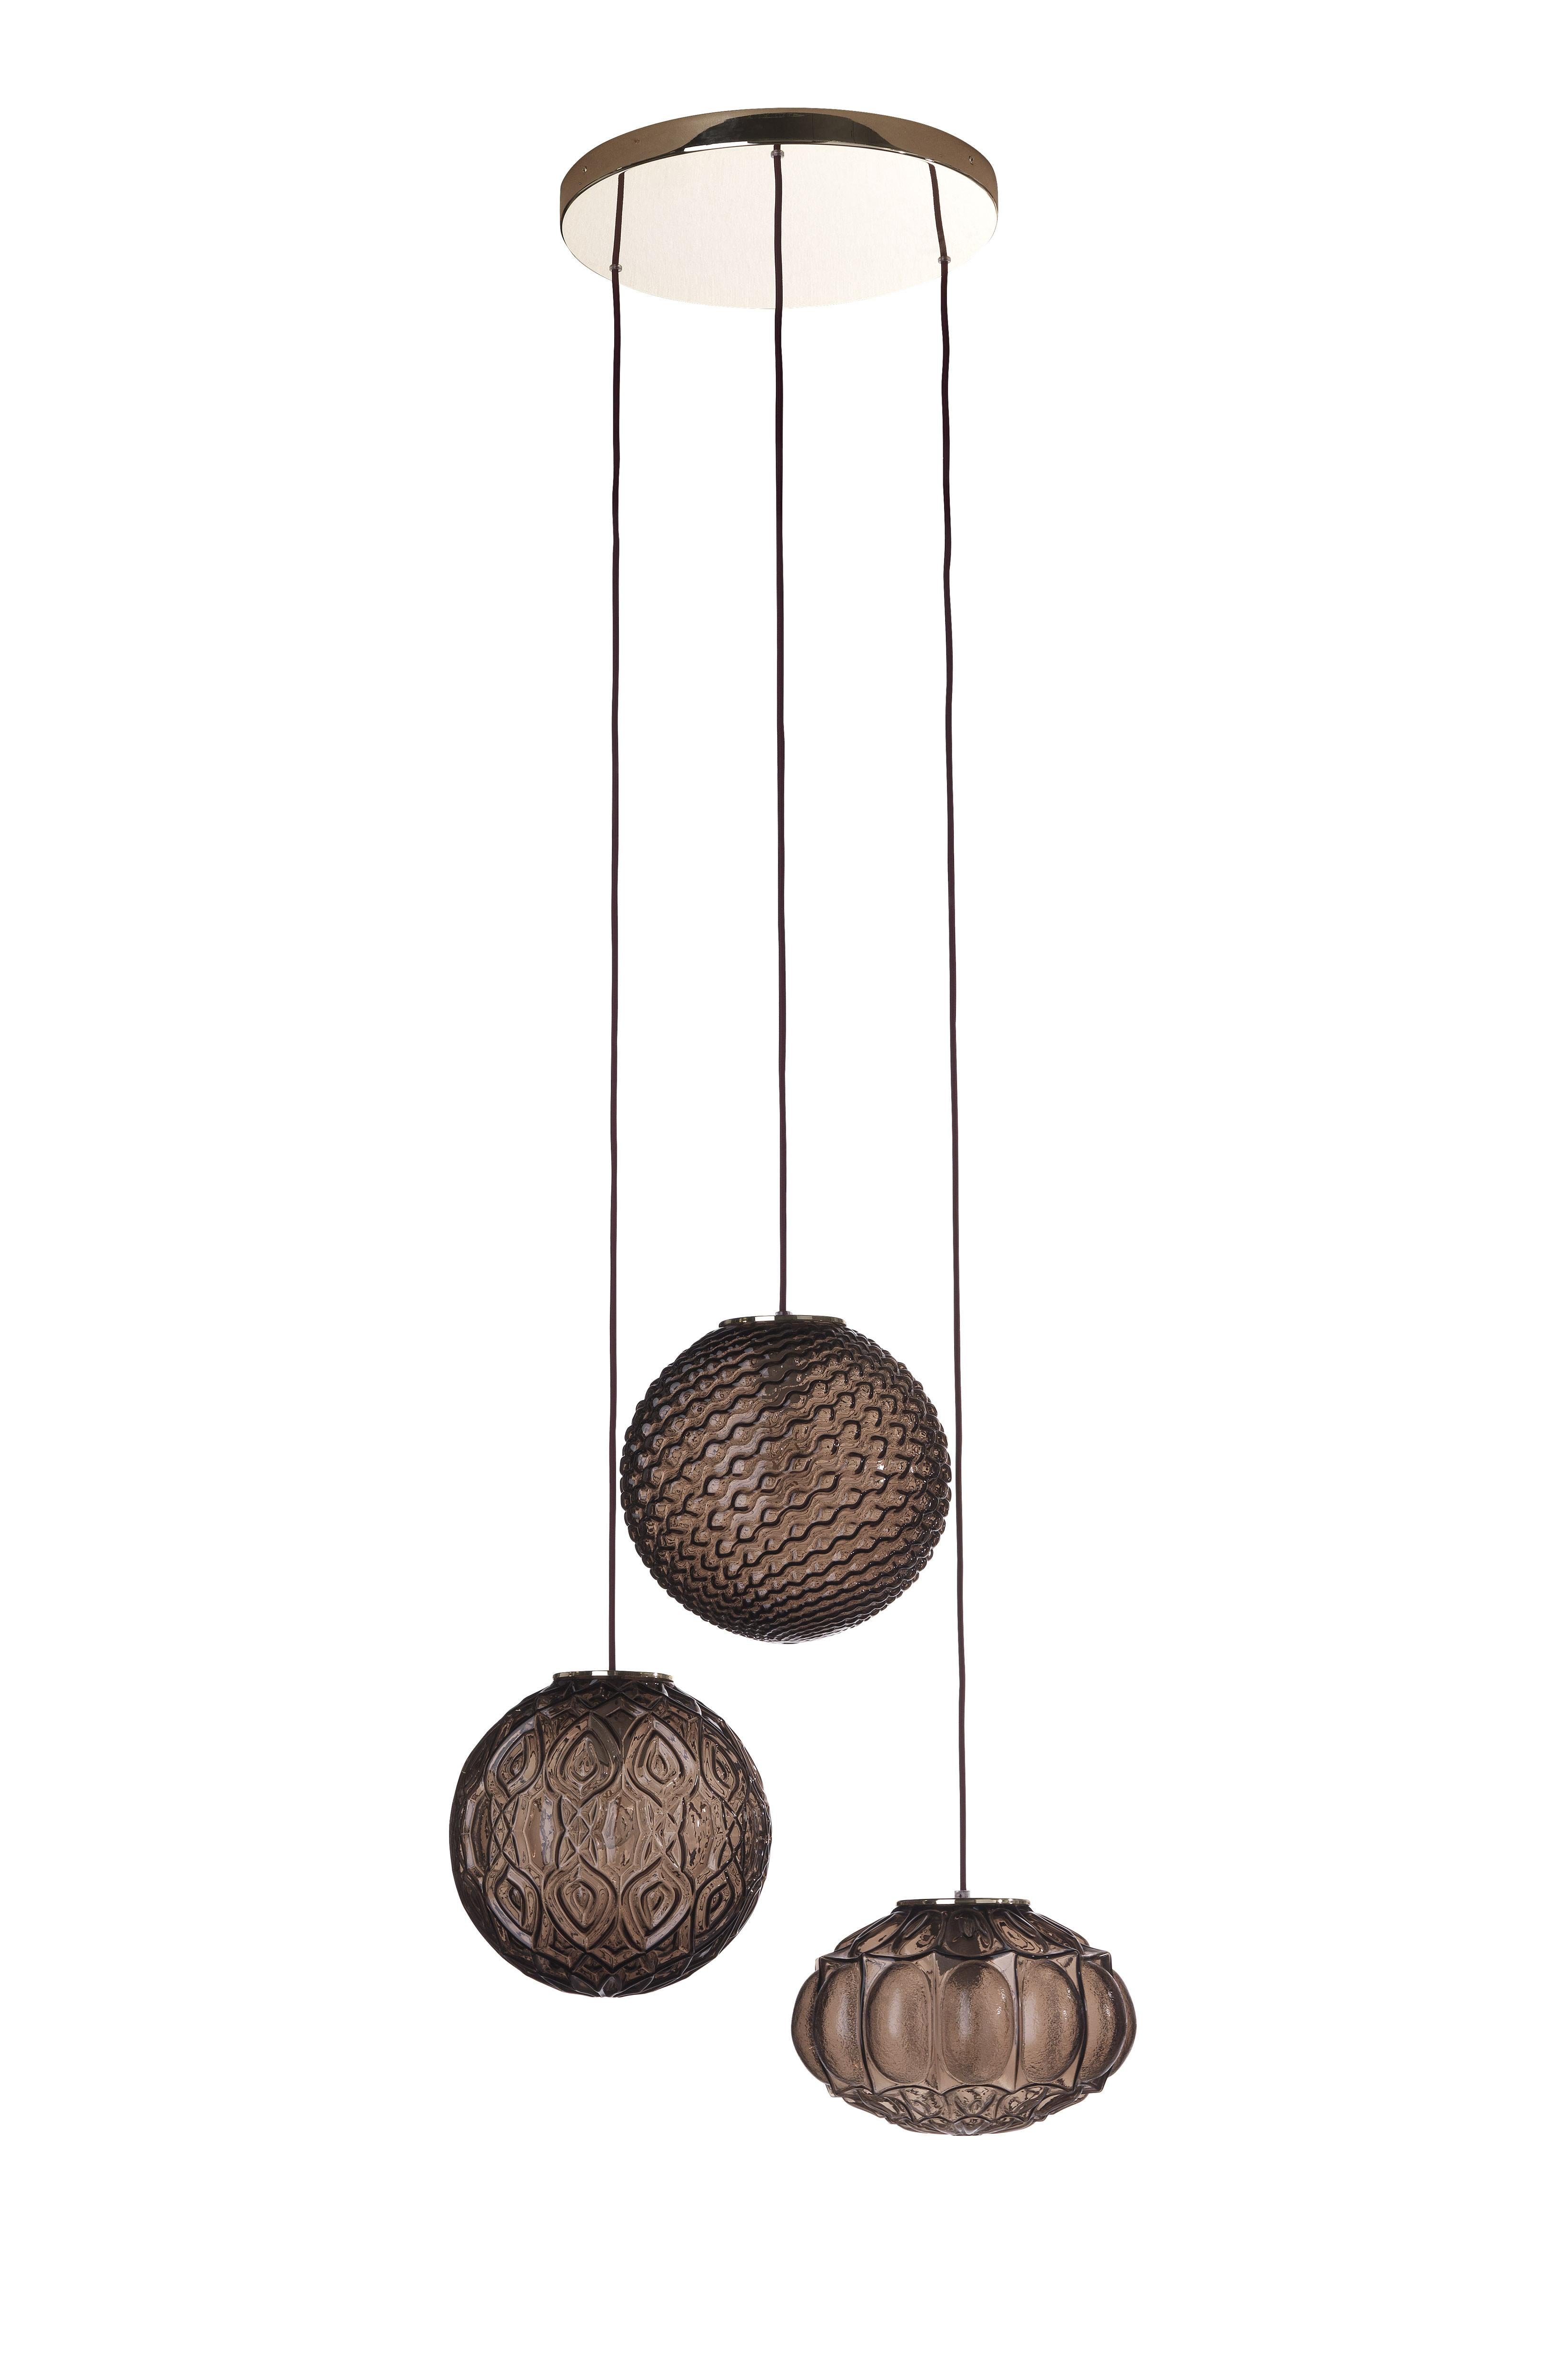 CHAGALL 3-light chandelier with shades in clear bronze blown glass. Cables in bordeaux fabric. Ceiling rose in gold finishing.